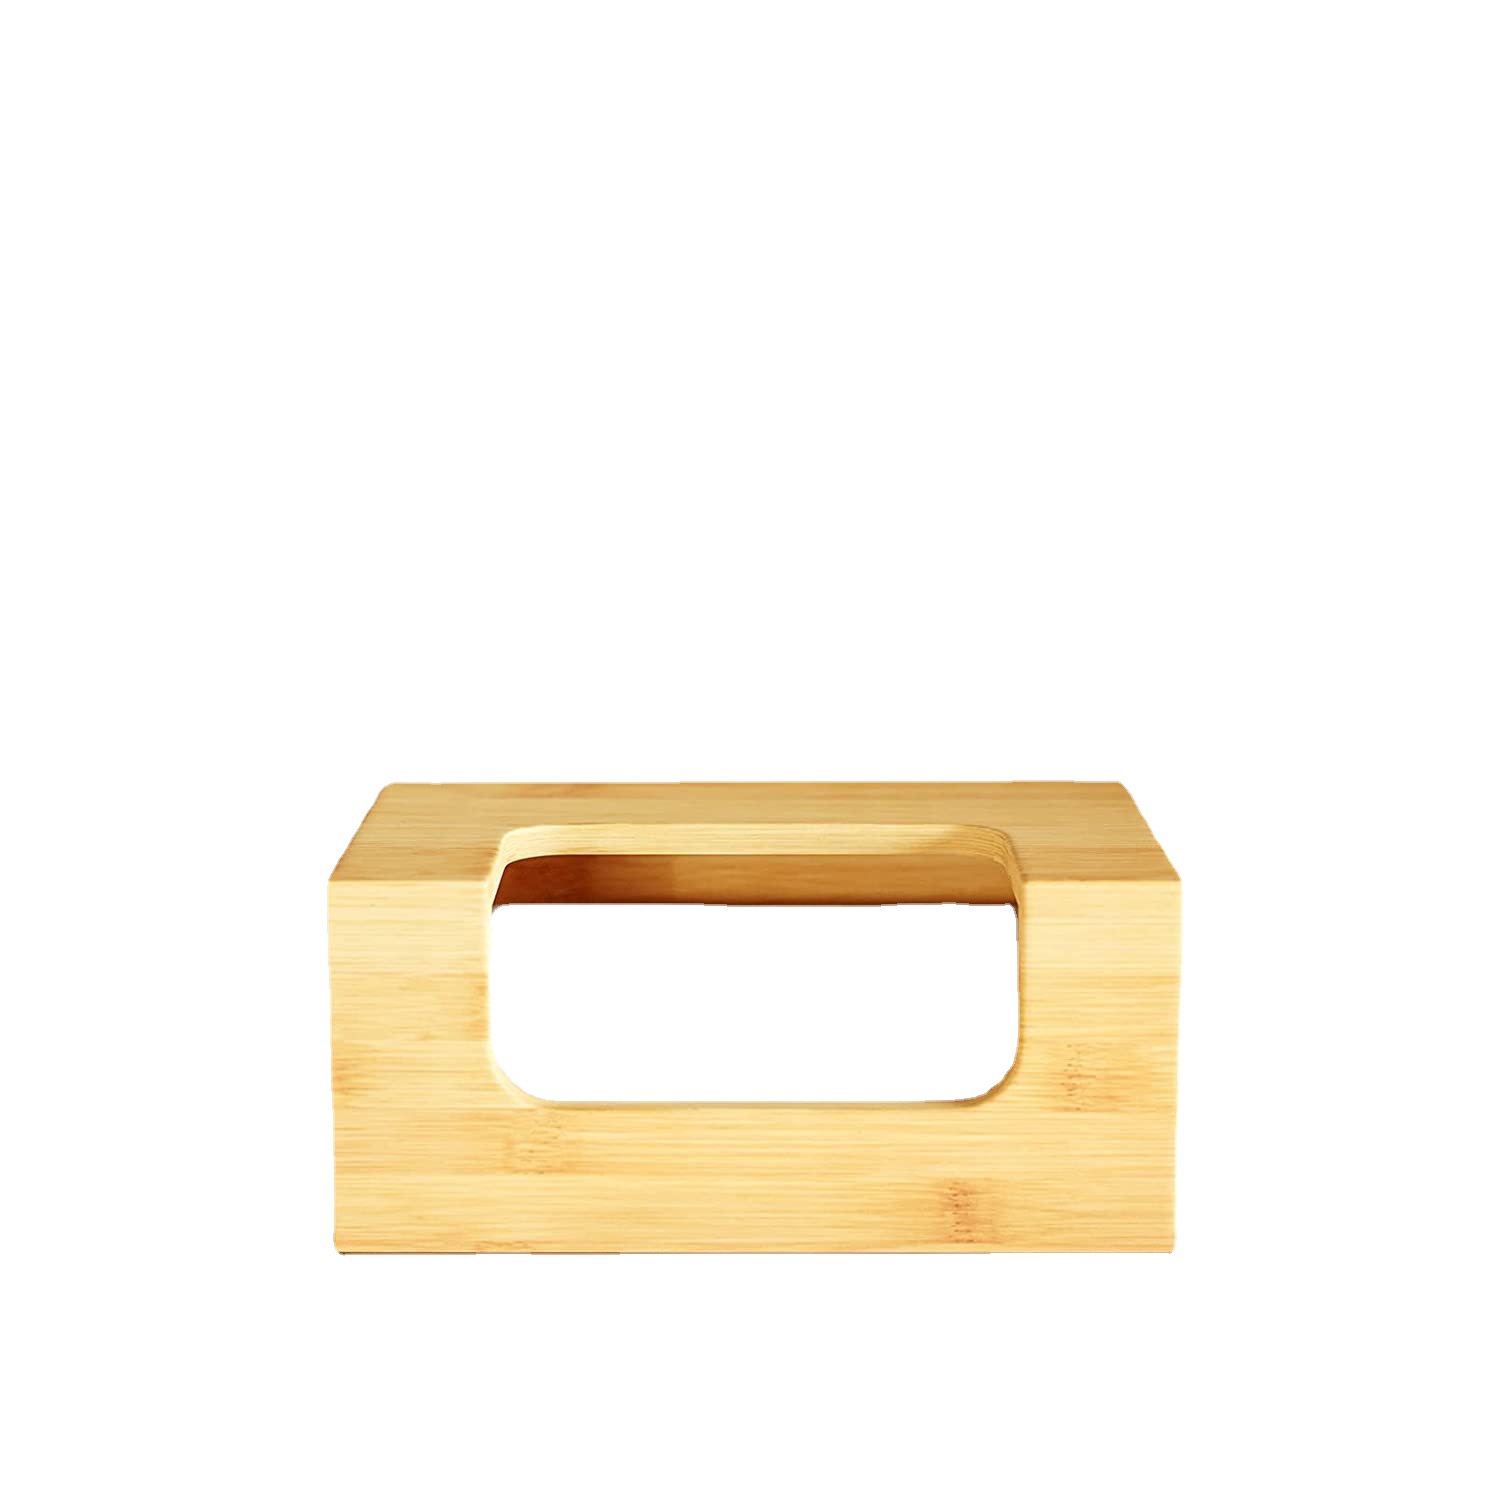 Household Minimalist Paper Extraction Box Bamboo Storage Box with Opening for Farmhouse Decorative Paper Towel Organizing and Storage